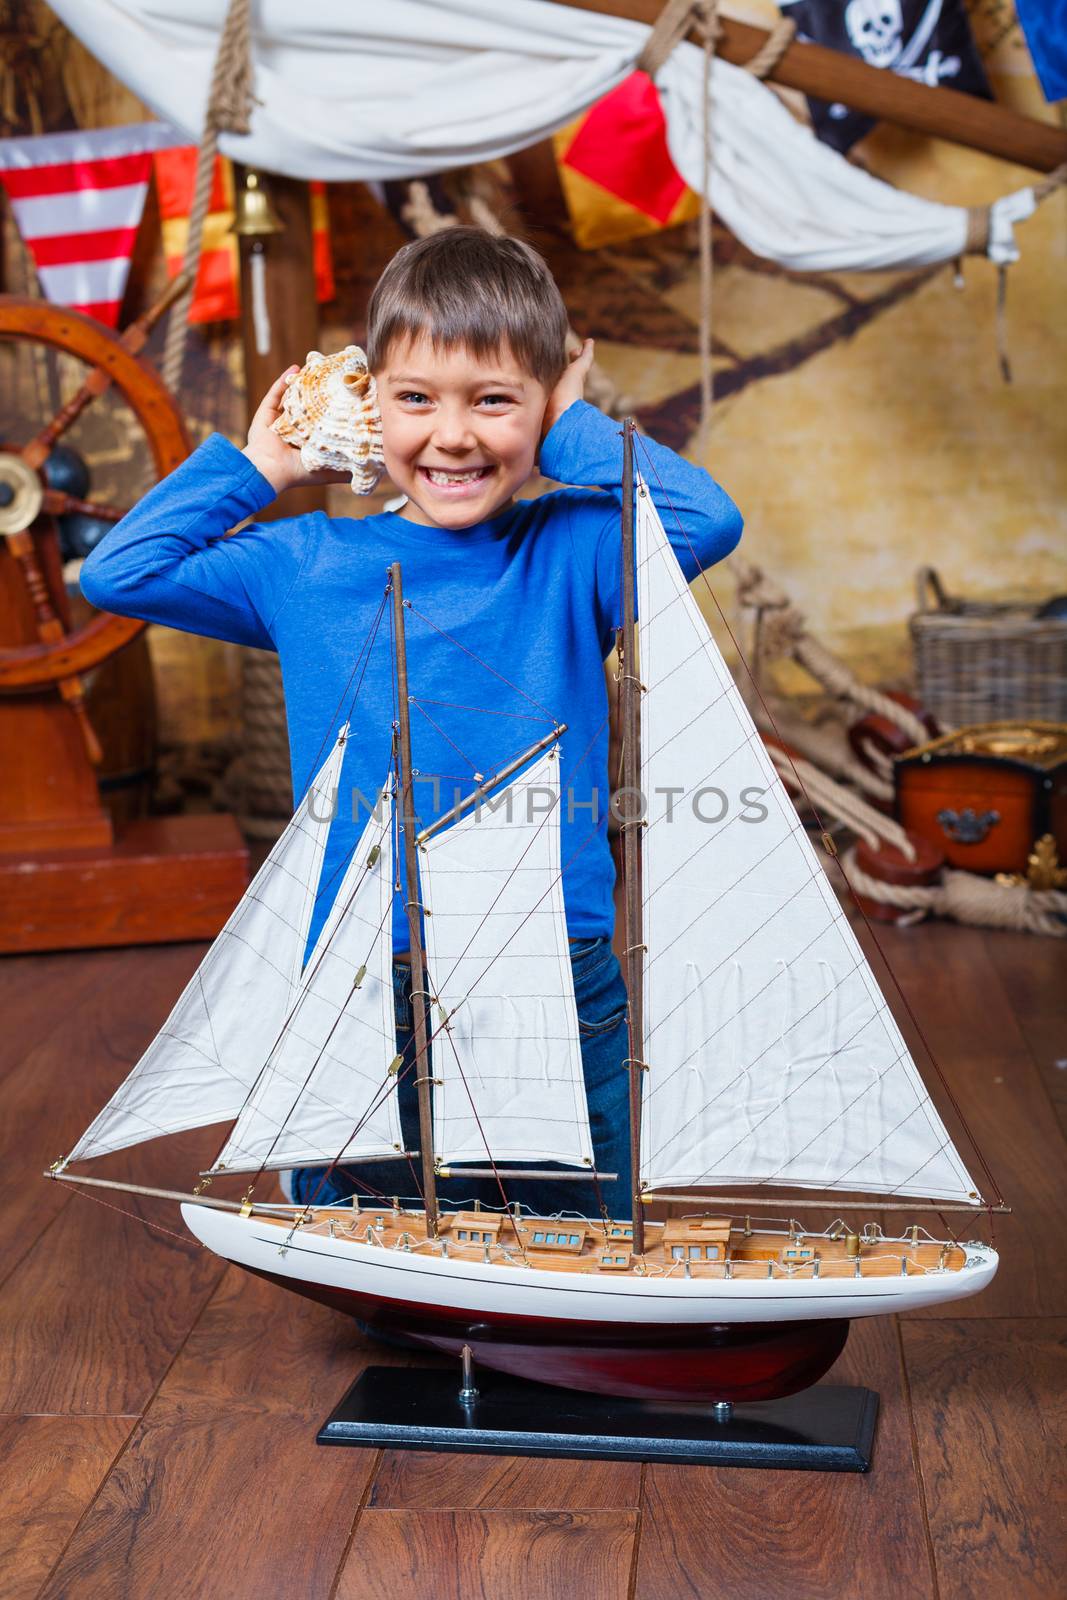 Cute little boy with ship toy on the deck of a ship